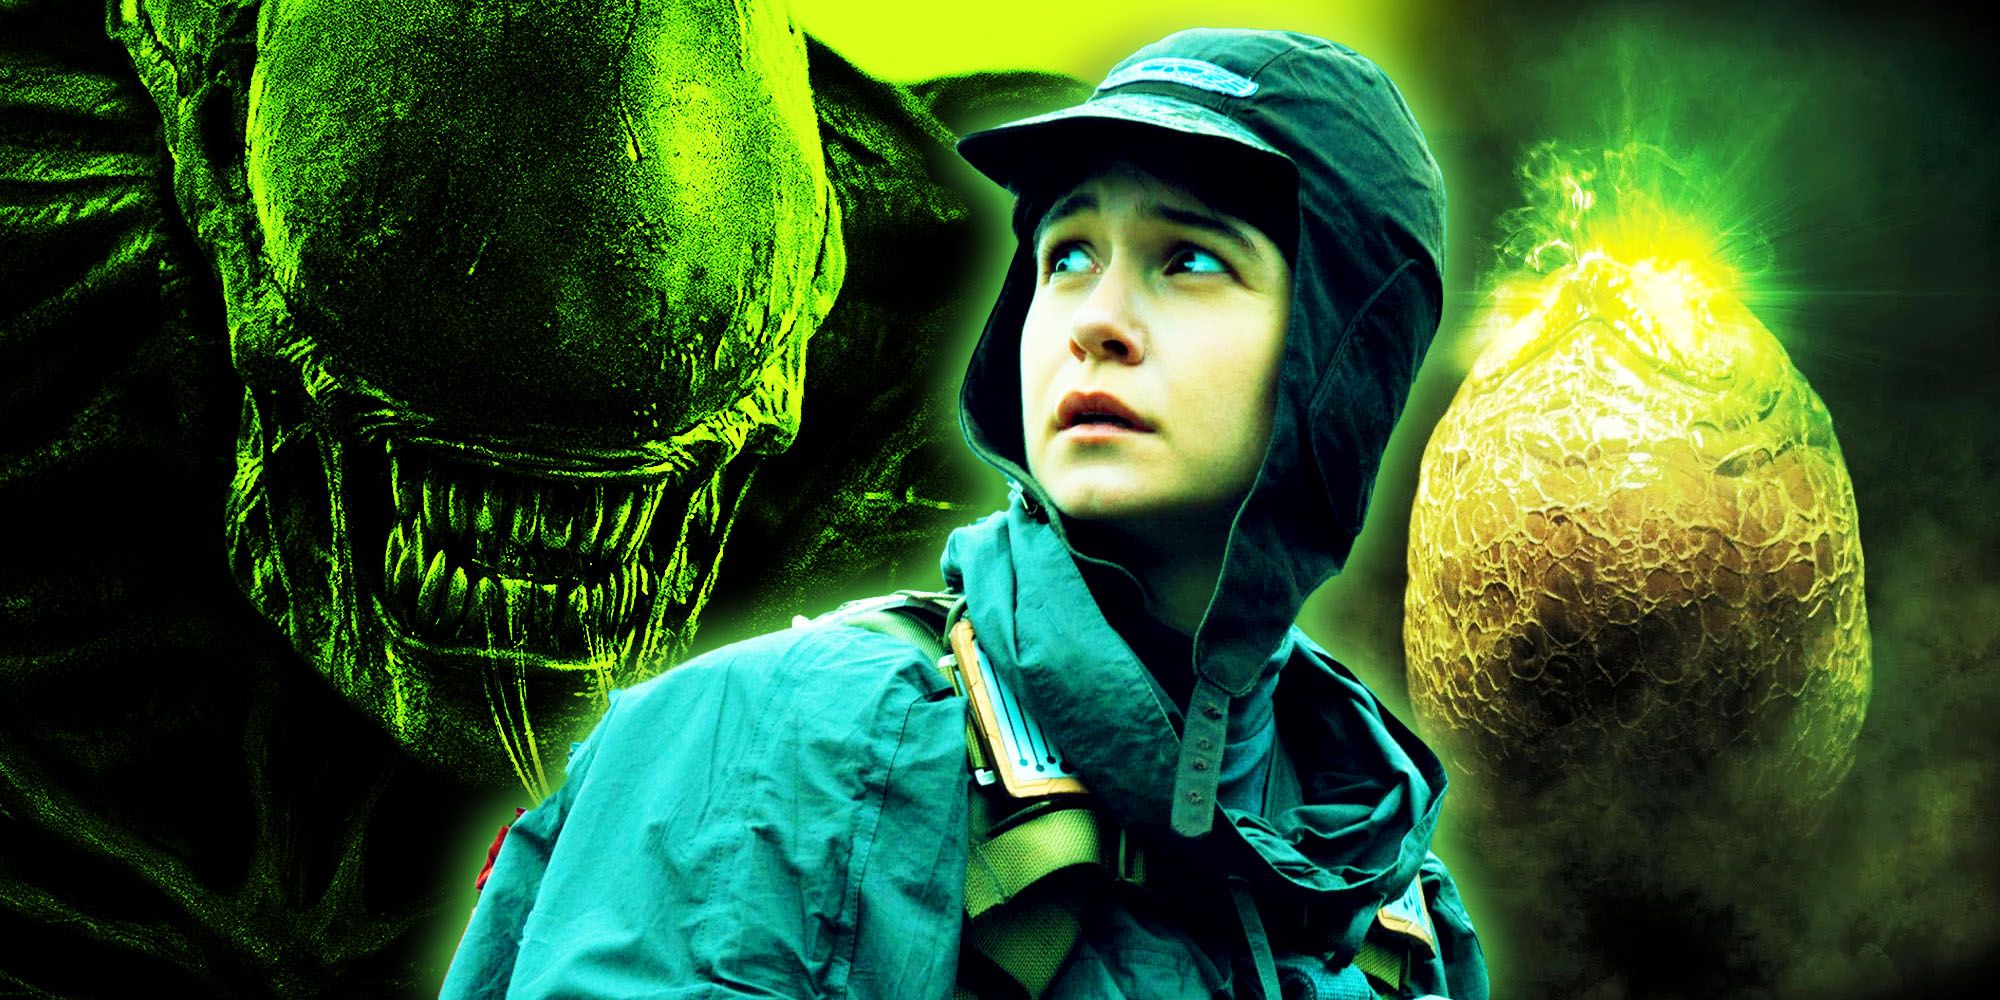 Disney’s New Alien Movie Is Exciting & Worrying For Exactly The Same Reason